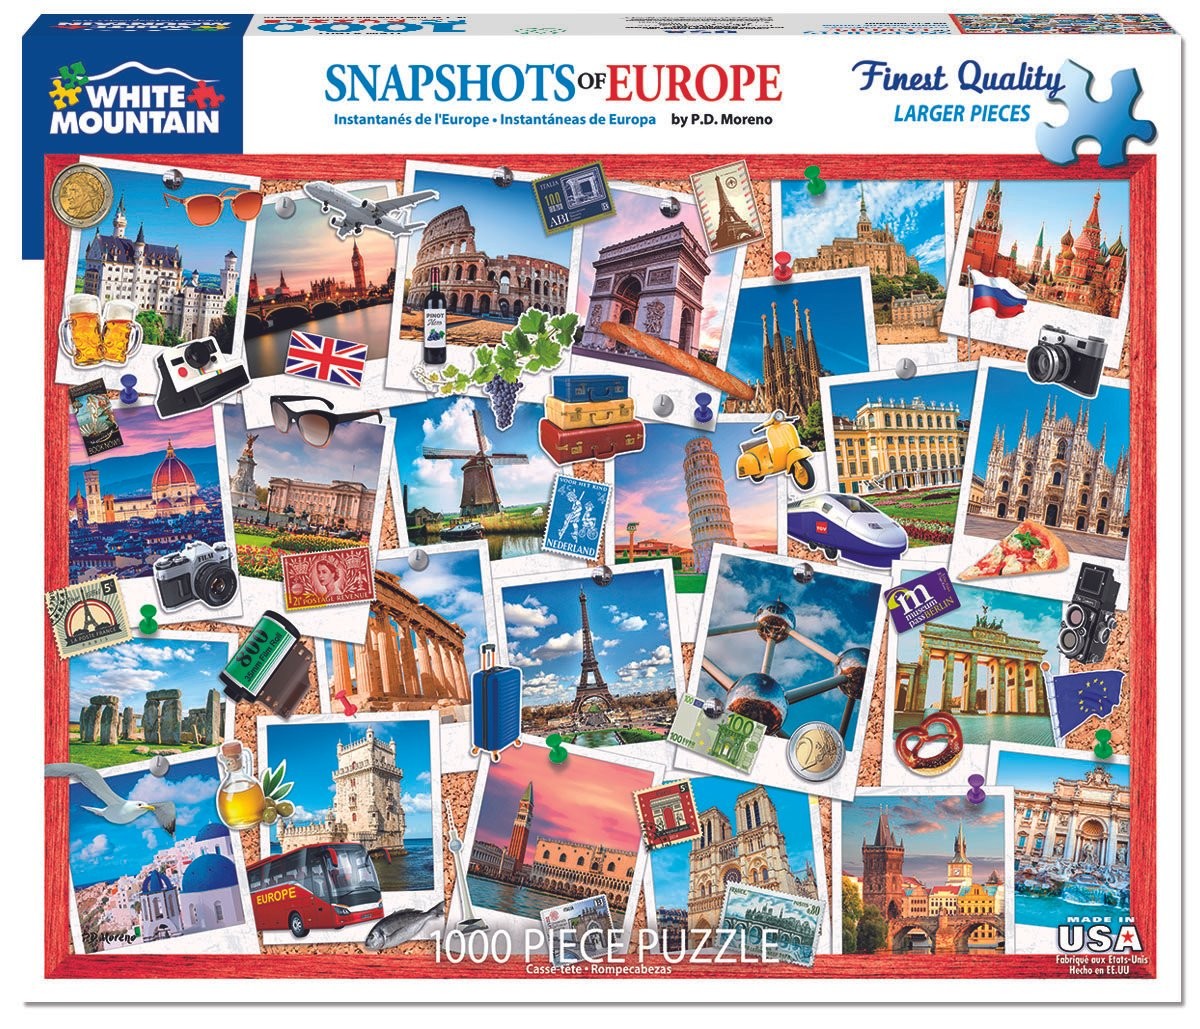 Snapshots of Europe 1000 Piece Jigsaw Puzzle